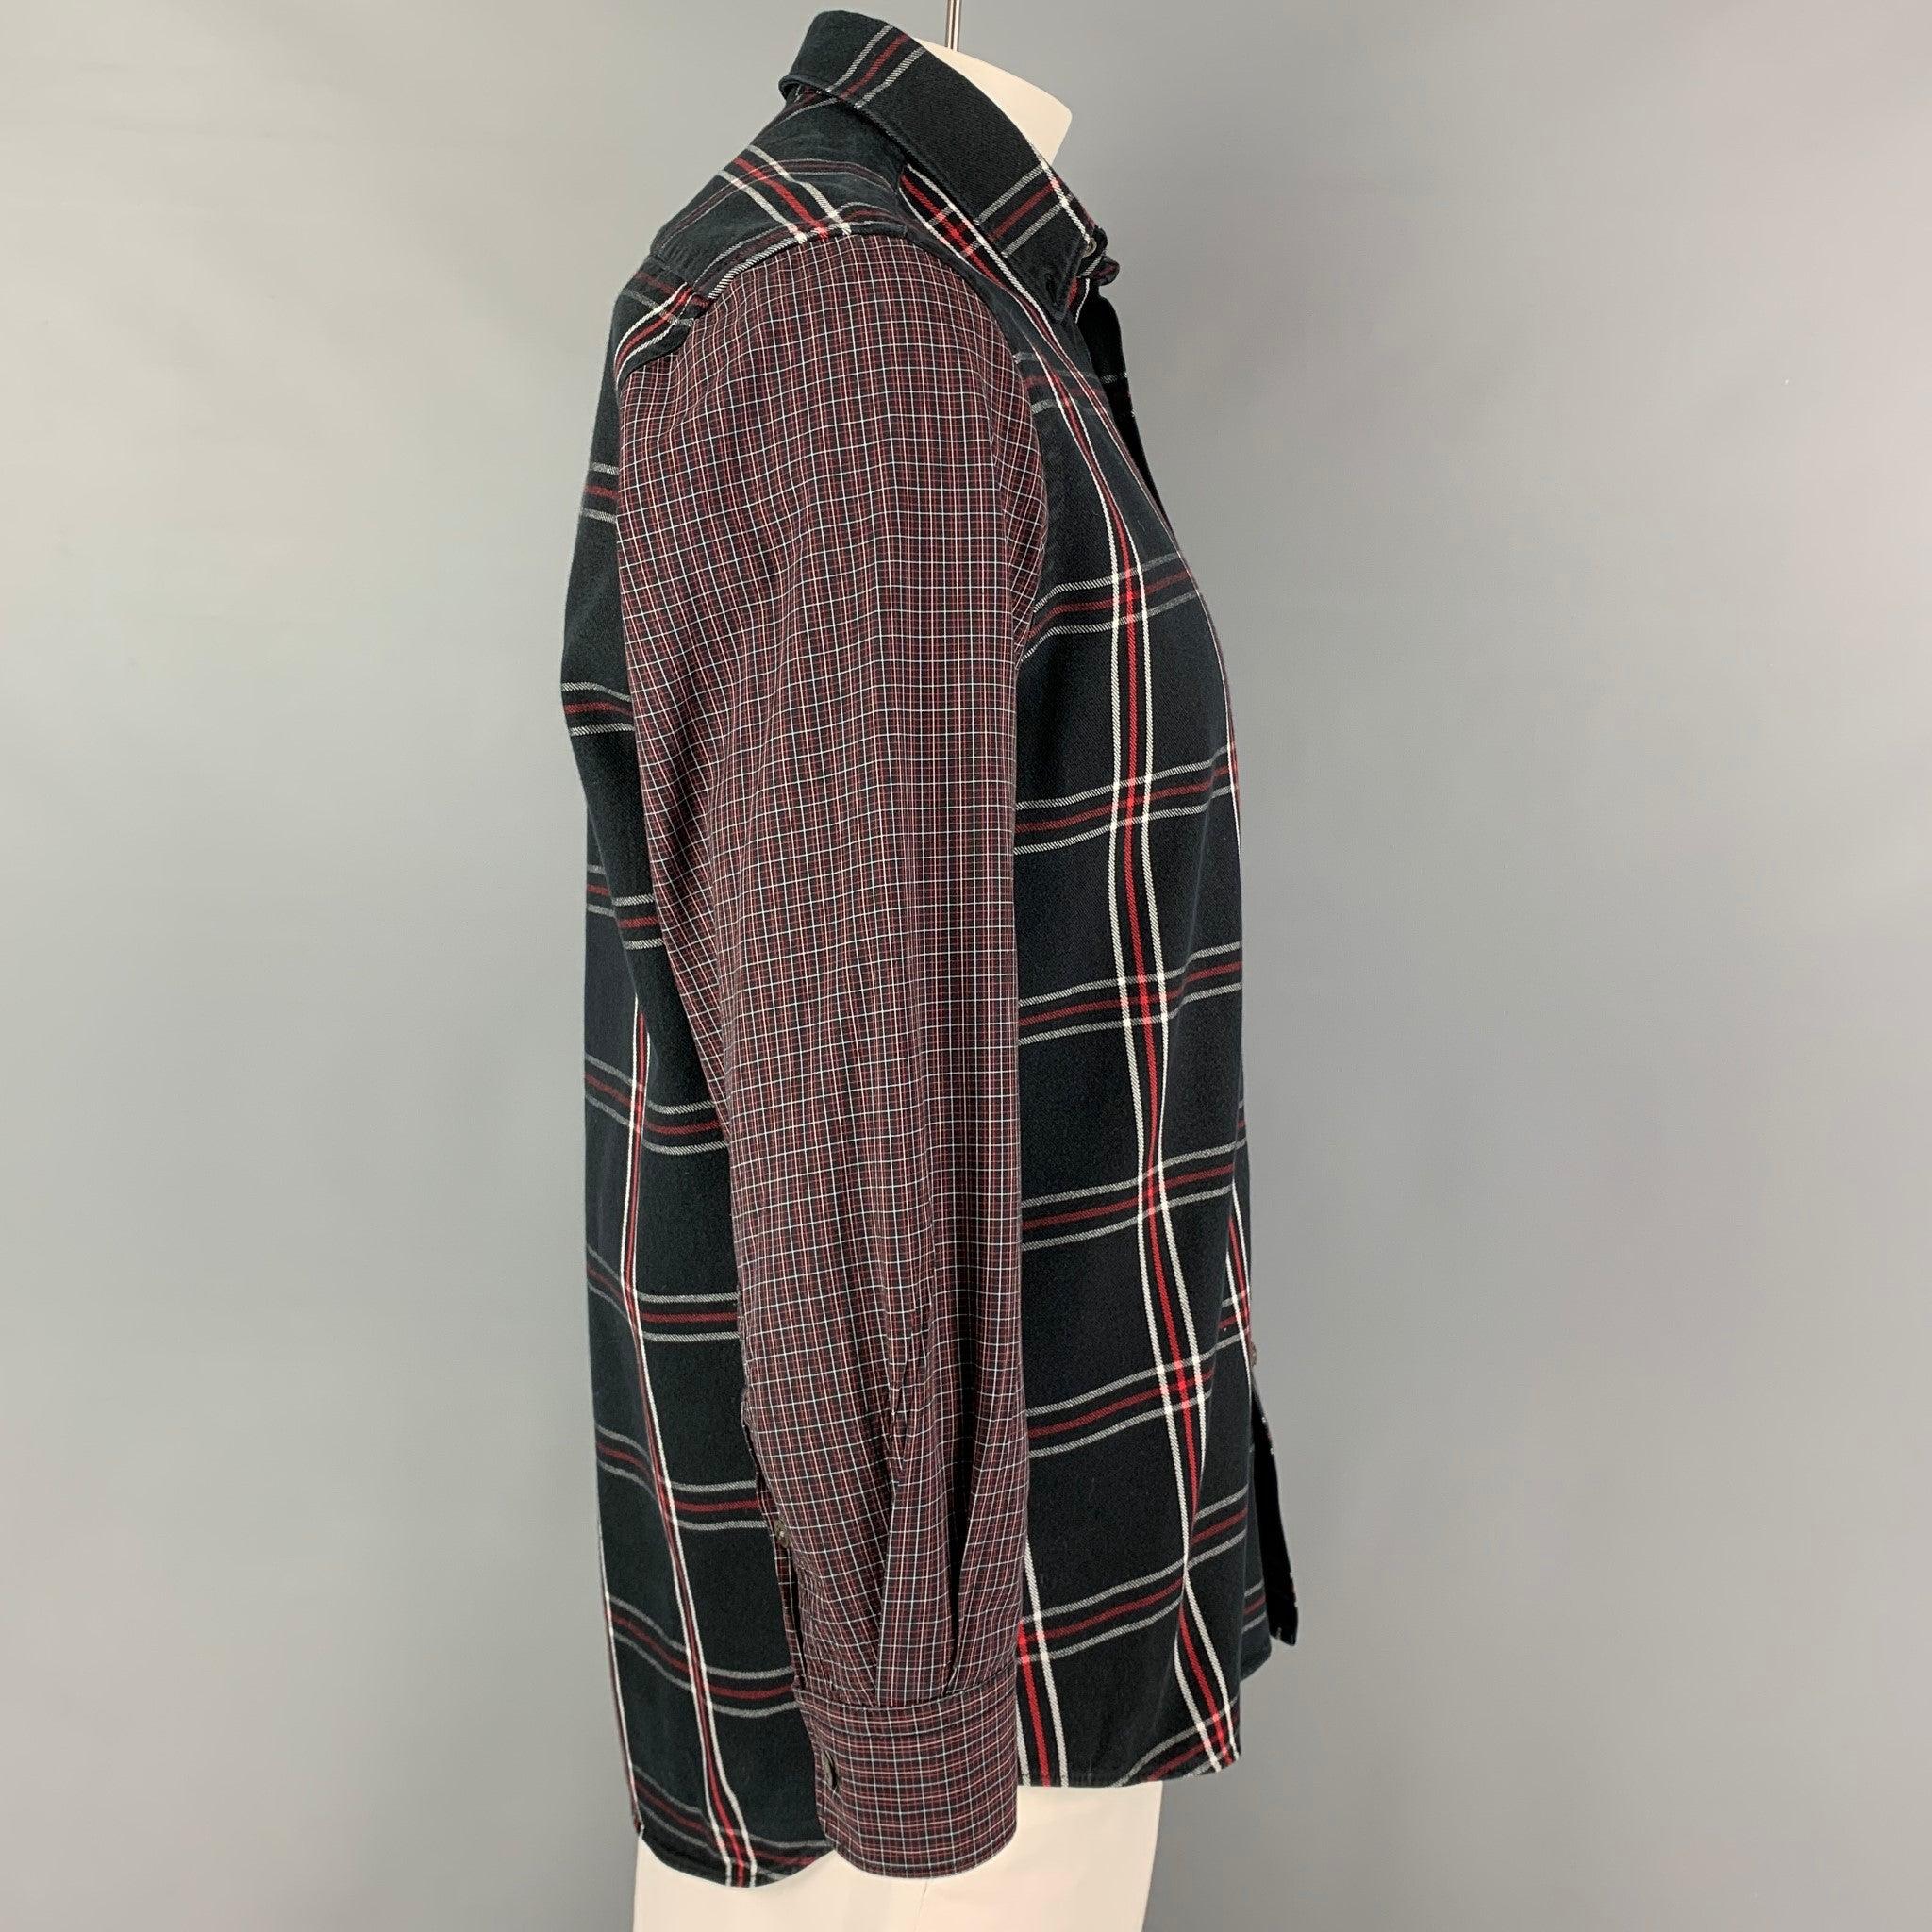 MCQ by ALEXANDER McQUEEN long sleeve shirt comes in a black & red plaid cotton featuring a button down collar, patch pocket, and a button up closure.
Very Good Pre-Owned Condition. Missing single button. As-is.  

Marked:   IT 50 

Measurements: 
